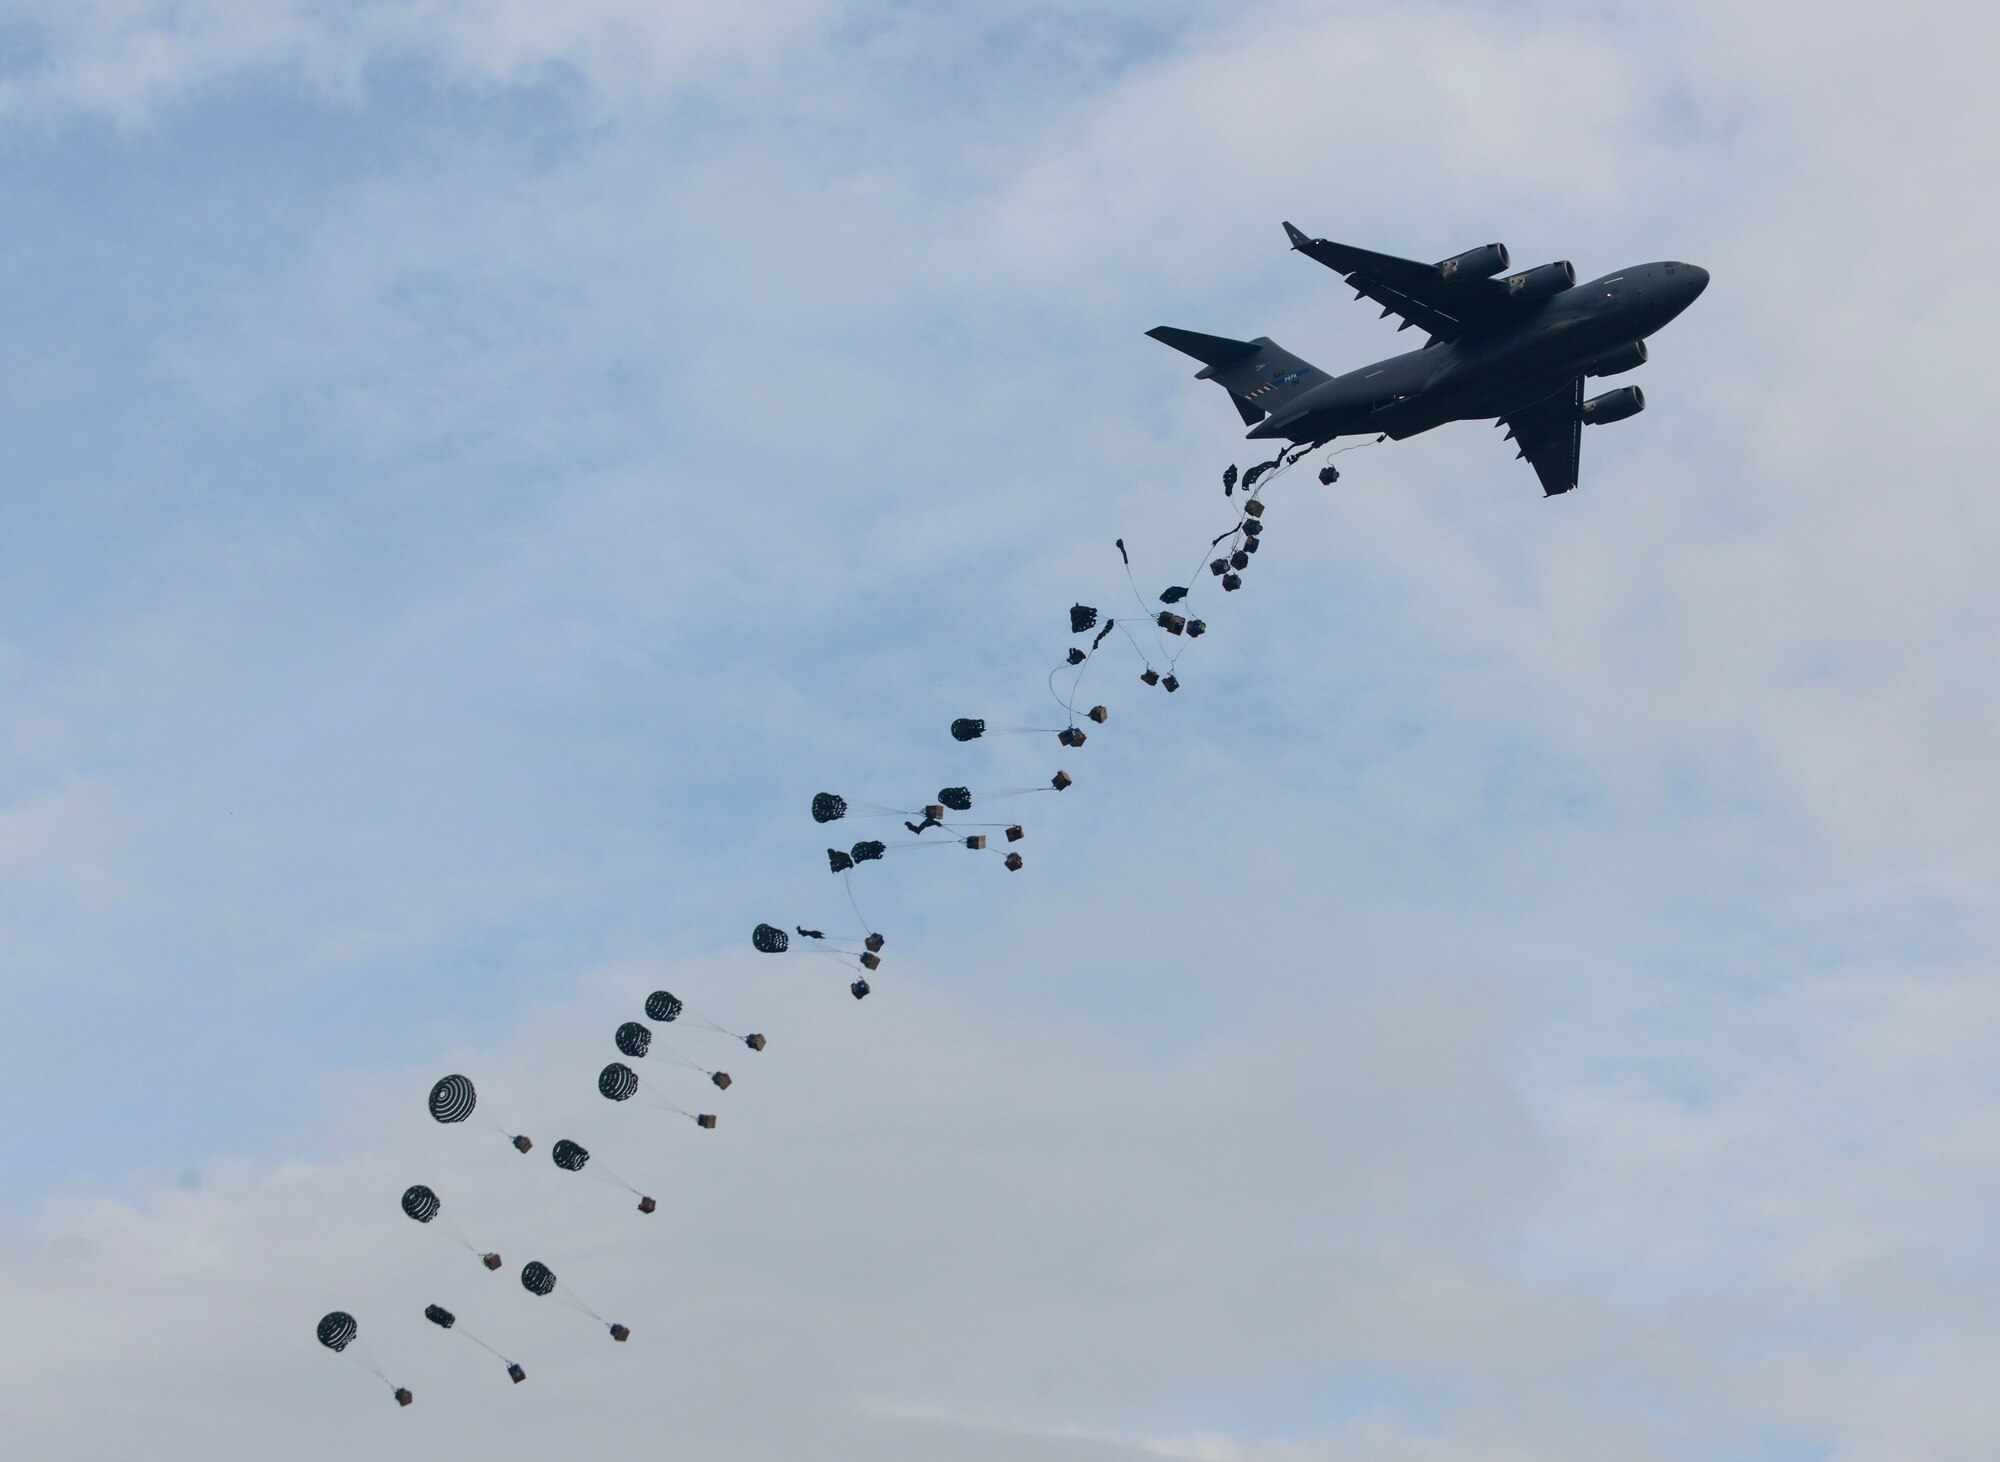 A C-17 Globemaster III drops 32 bundles of cargo during a demonstration at the C-17 hangar complex grand opening at Pàpa Air Base, Hungary on Nov. 17, 2016. The new hangar complex will allow the Heavy Airlift Wing to more efficiently maintain their C-17s. (U.S. Air Force photo by Staff Sgt. Krystal Ardrey)